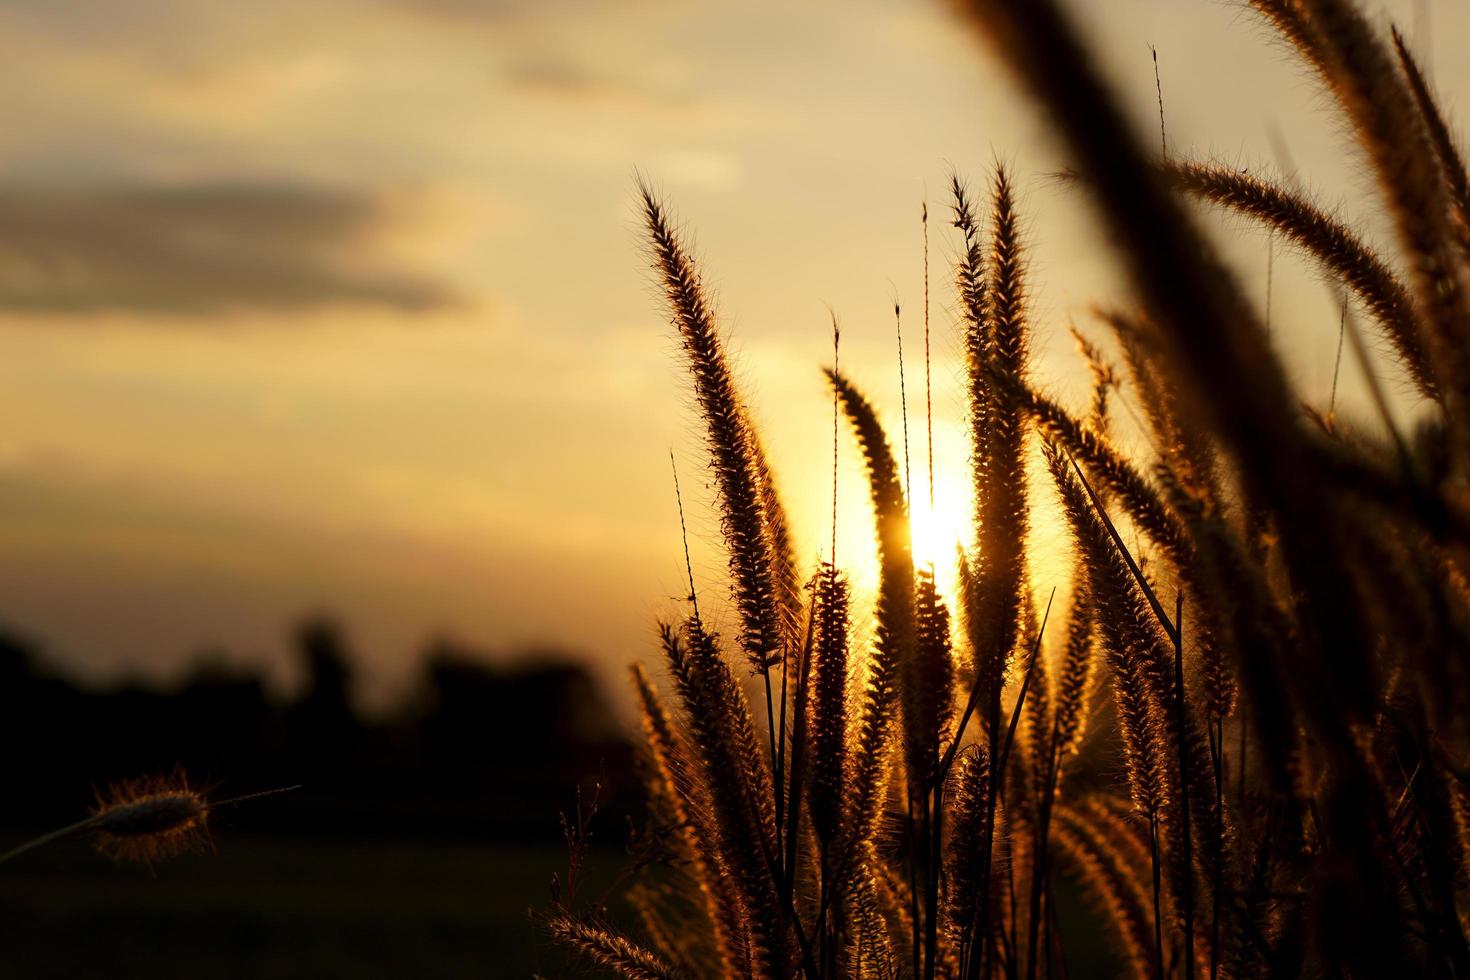 silhouette flowers grass sunset background photo